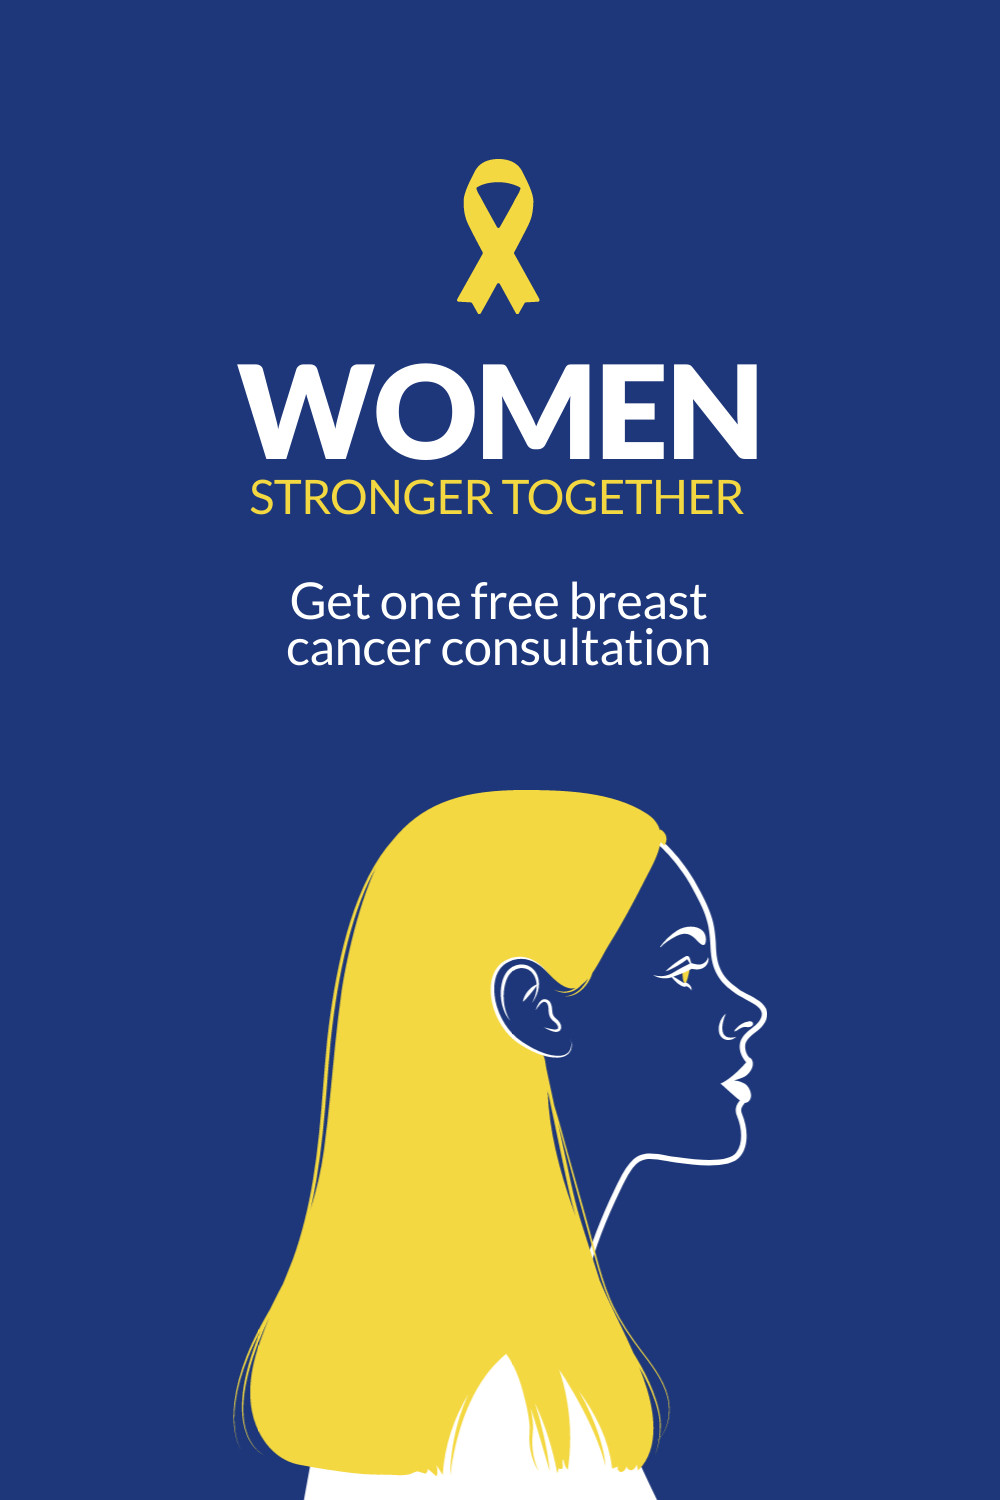 Woman's Day Stronger Together Inline Rectangle 300x250